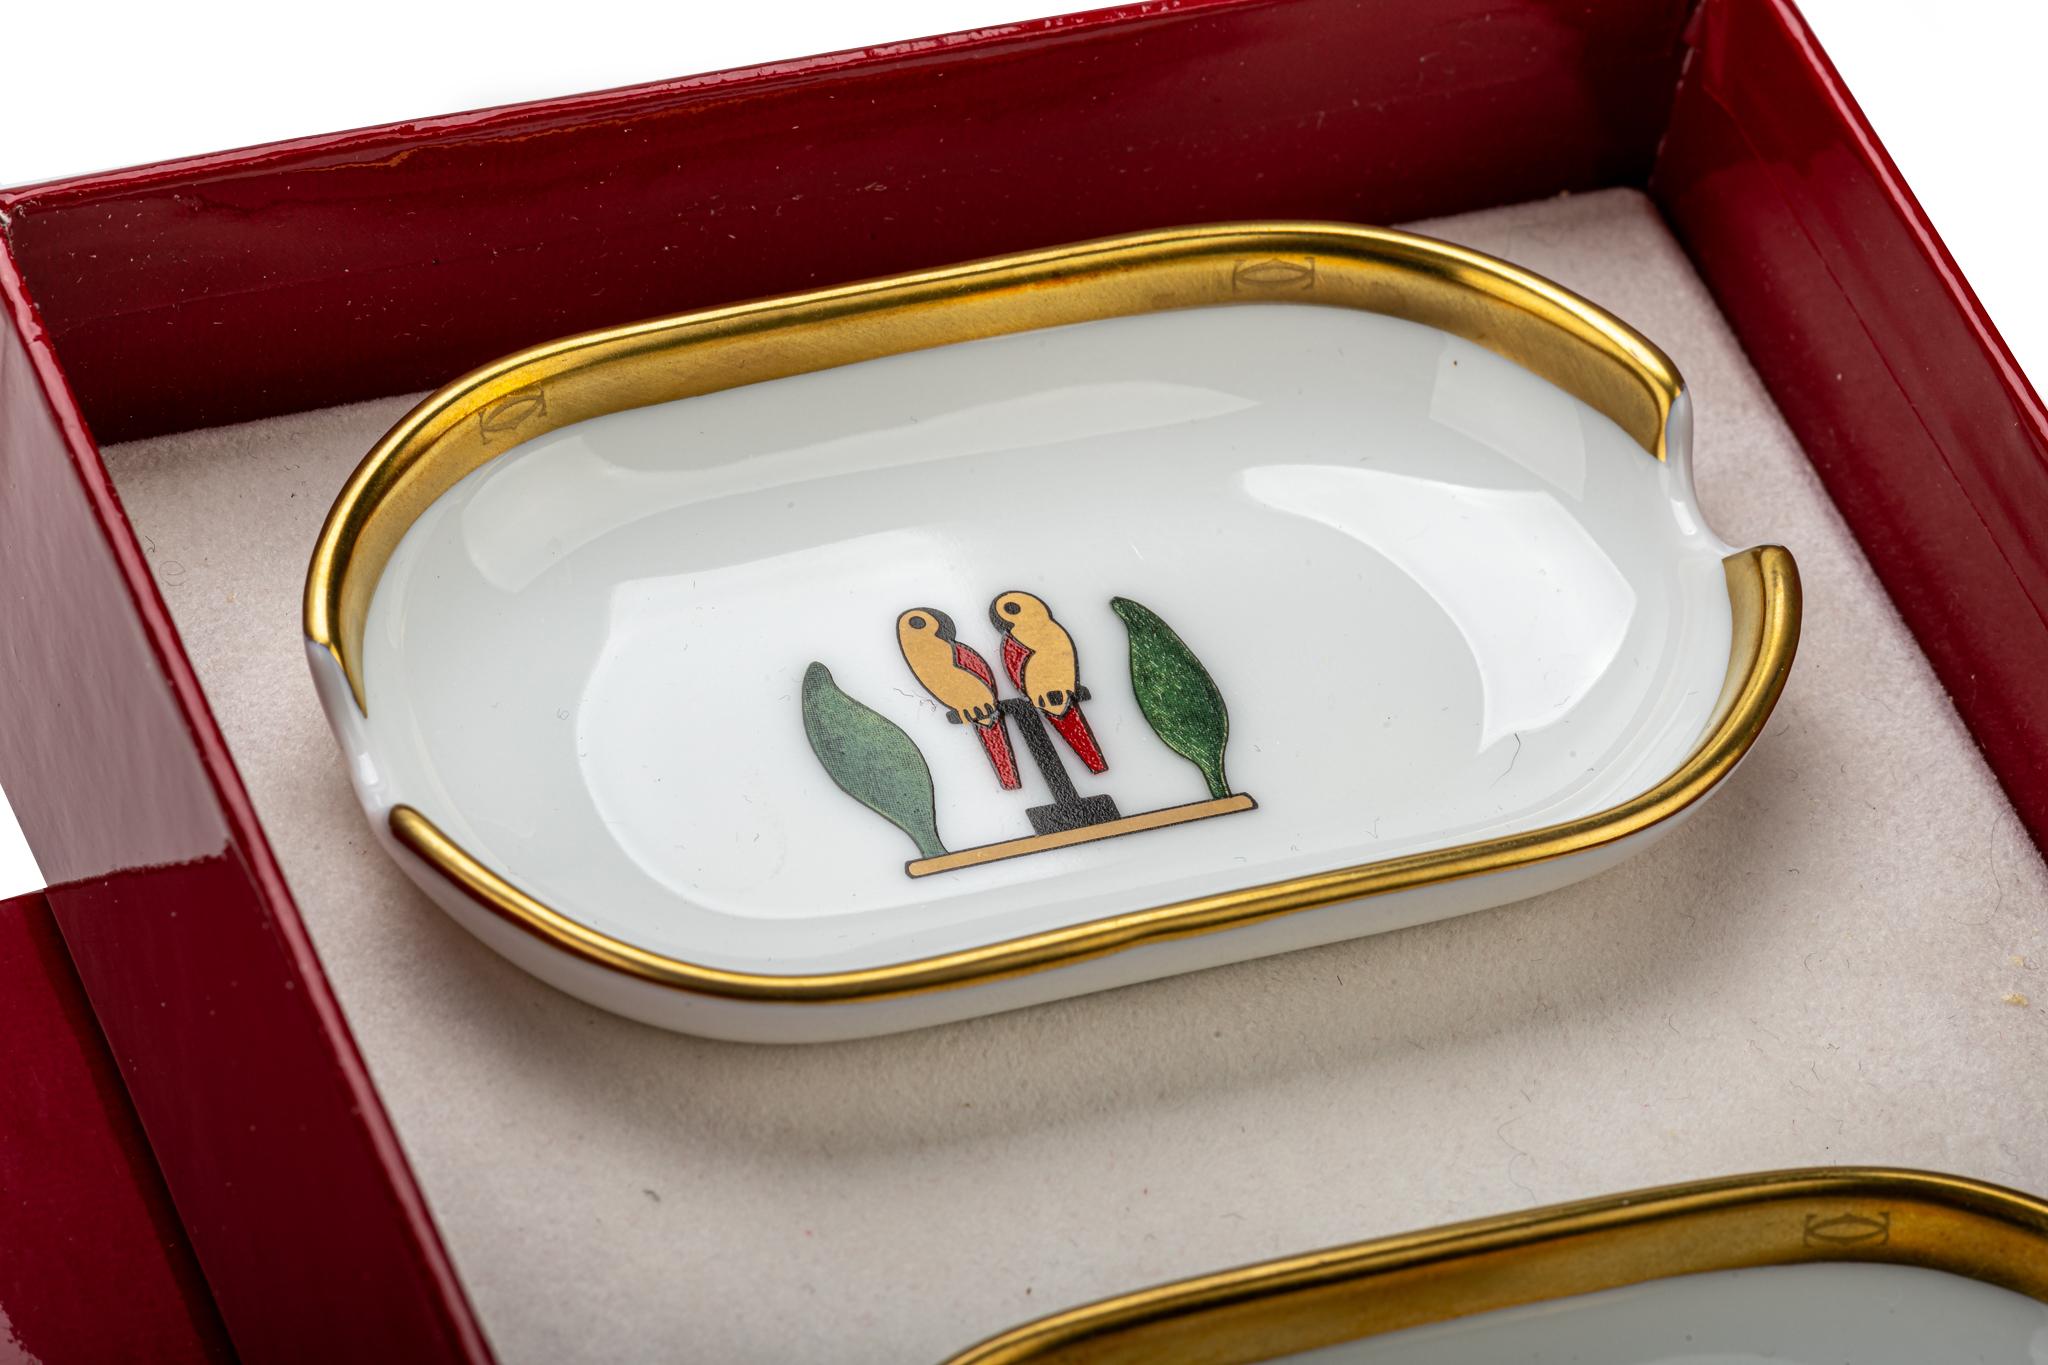 Cartier brand new in. box set of three small oval dishes. Limoges porcelain made in France. Signature burgundy box.